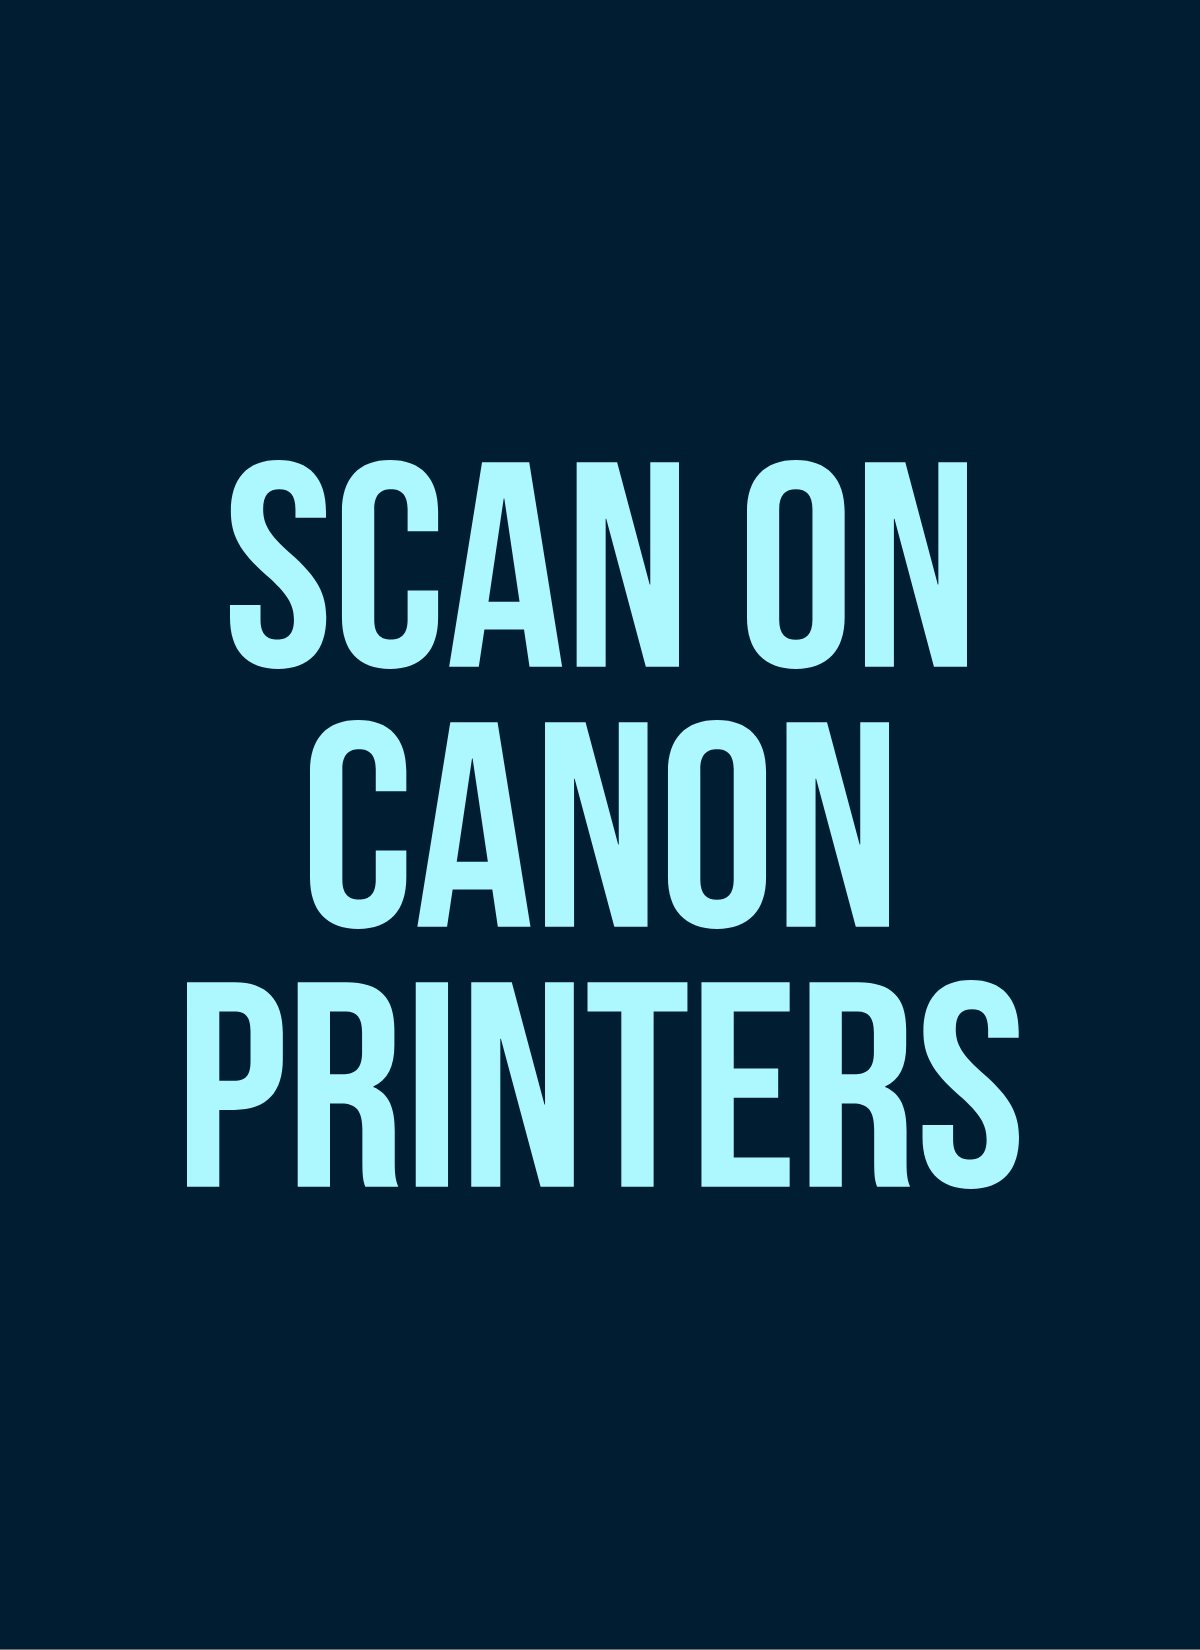 How to Scan on Canon Printer